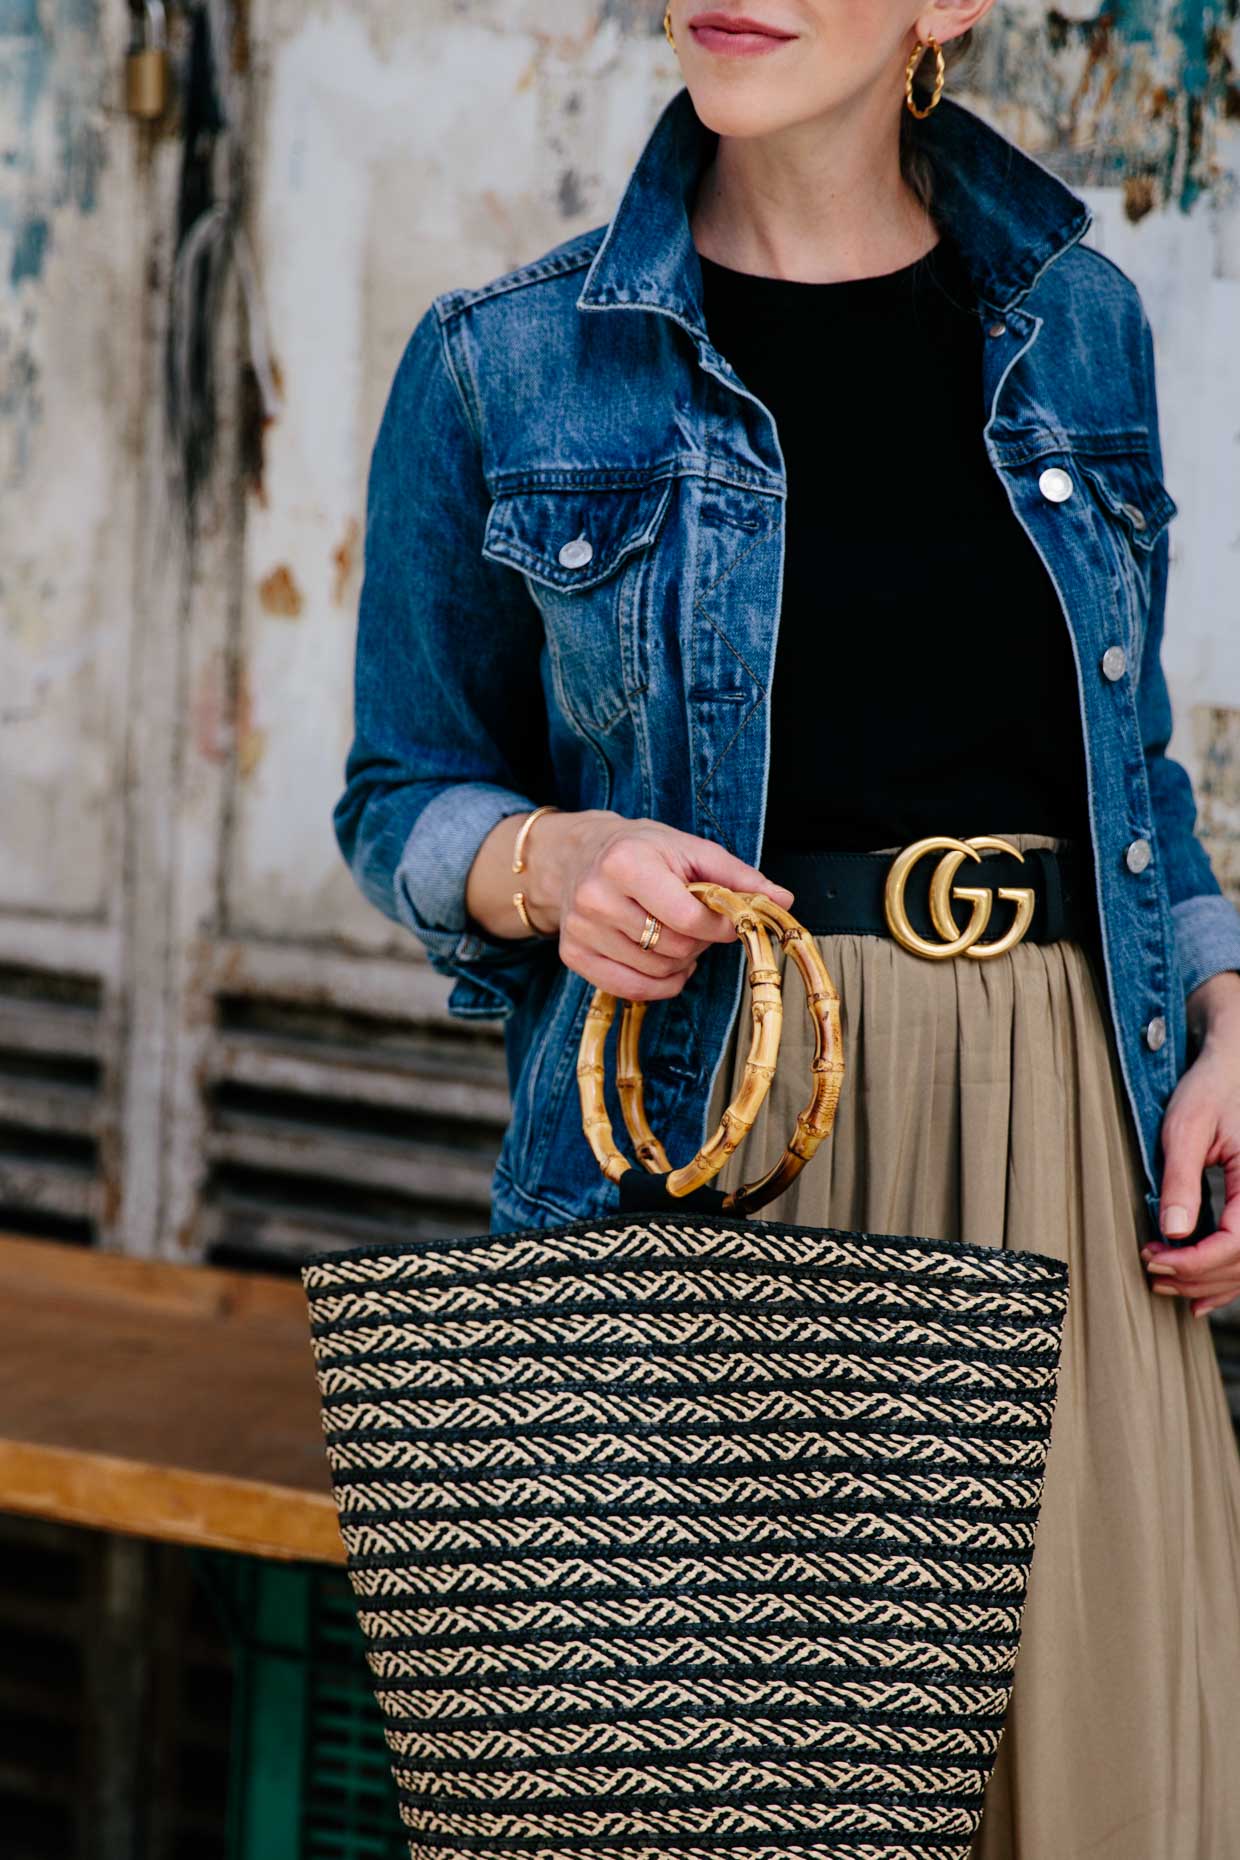 Meagan Brandon Fashion Blogger Of Meagan S Moda Wears Denim Jacket With Gucci Belt Pleated Skirt And Bamboo Handle Straw Tote Bag For Transitional Summer To Fall Outfit Idea Meagan S Moda